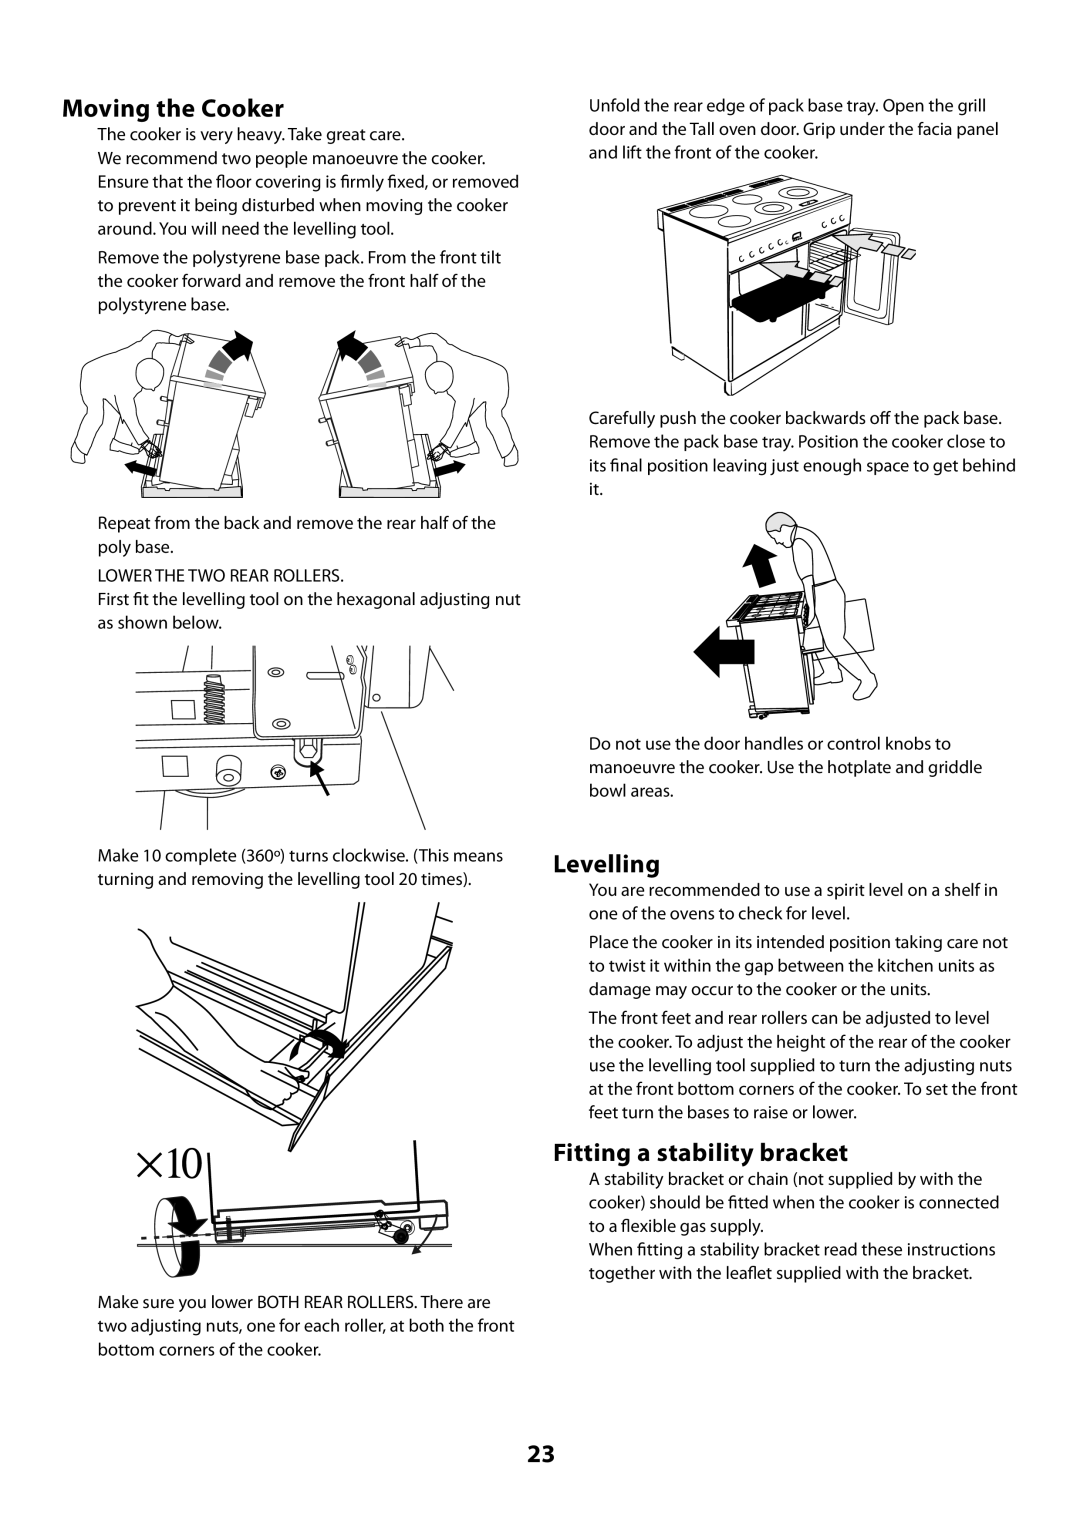 Rangemaster U109720 - 01 manual Moving the Cooker, Levelling, Fitting a stability bracket 